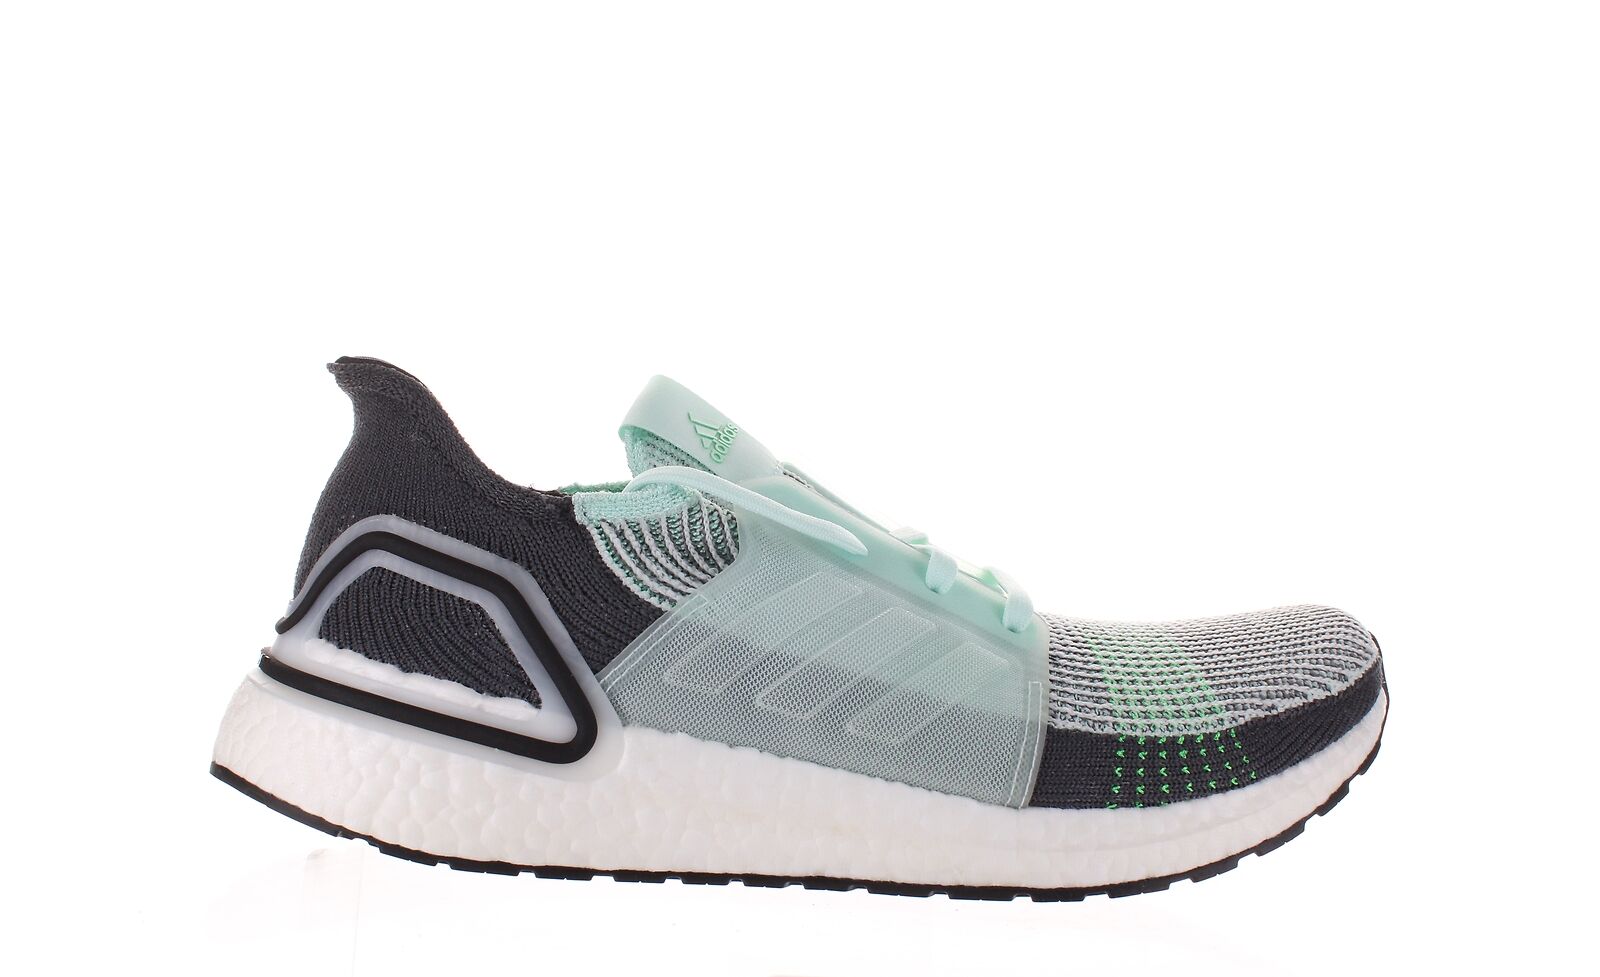 Adidas Mens Ultraboost 19 Ice Mint/Ice Mint/Grey Running Shoes Size 15 (2277984)